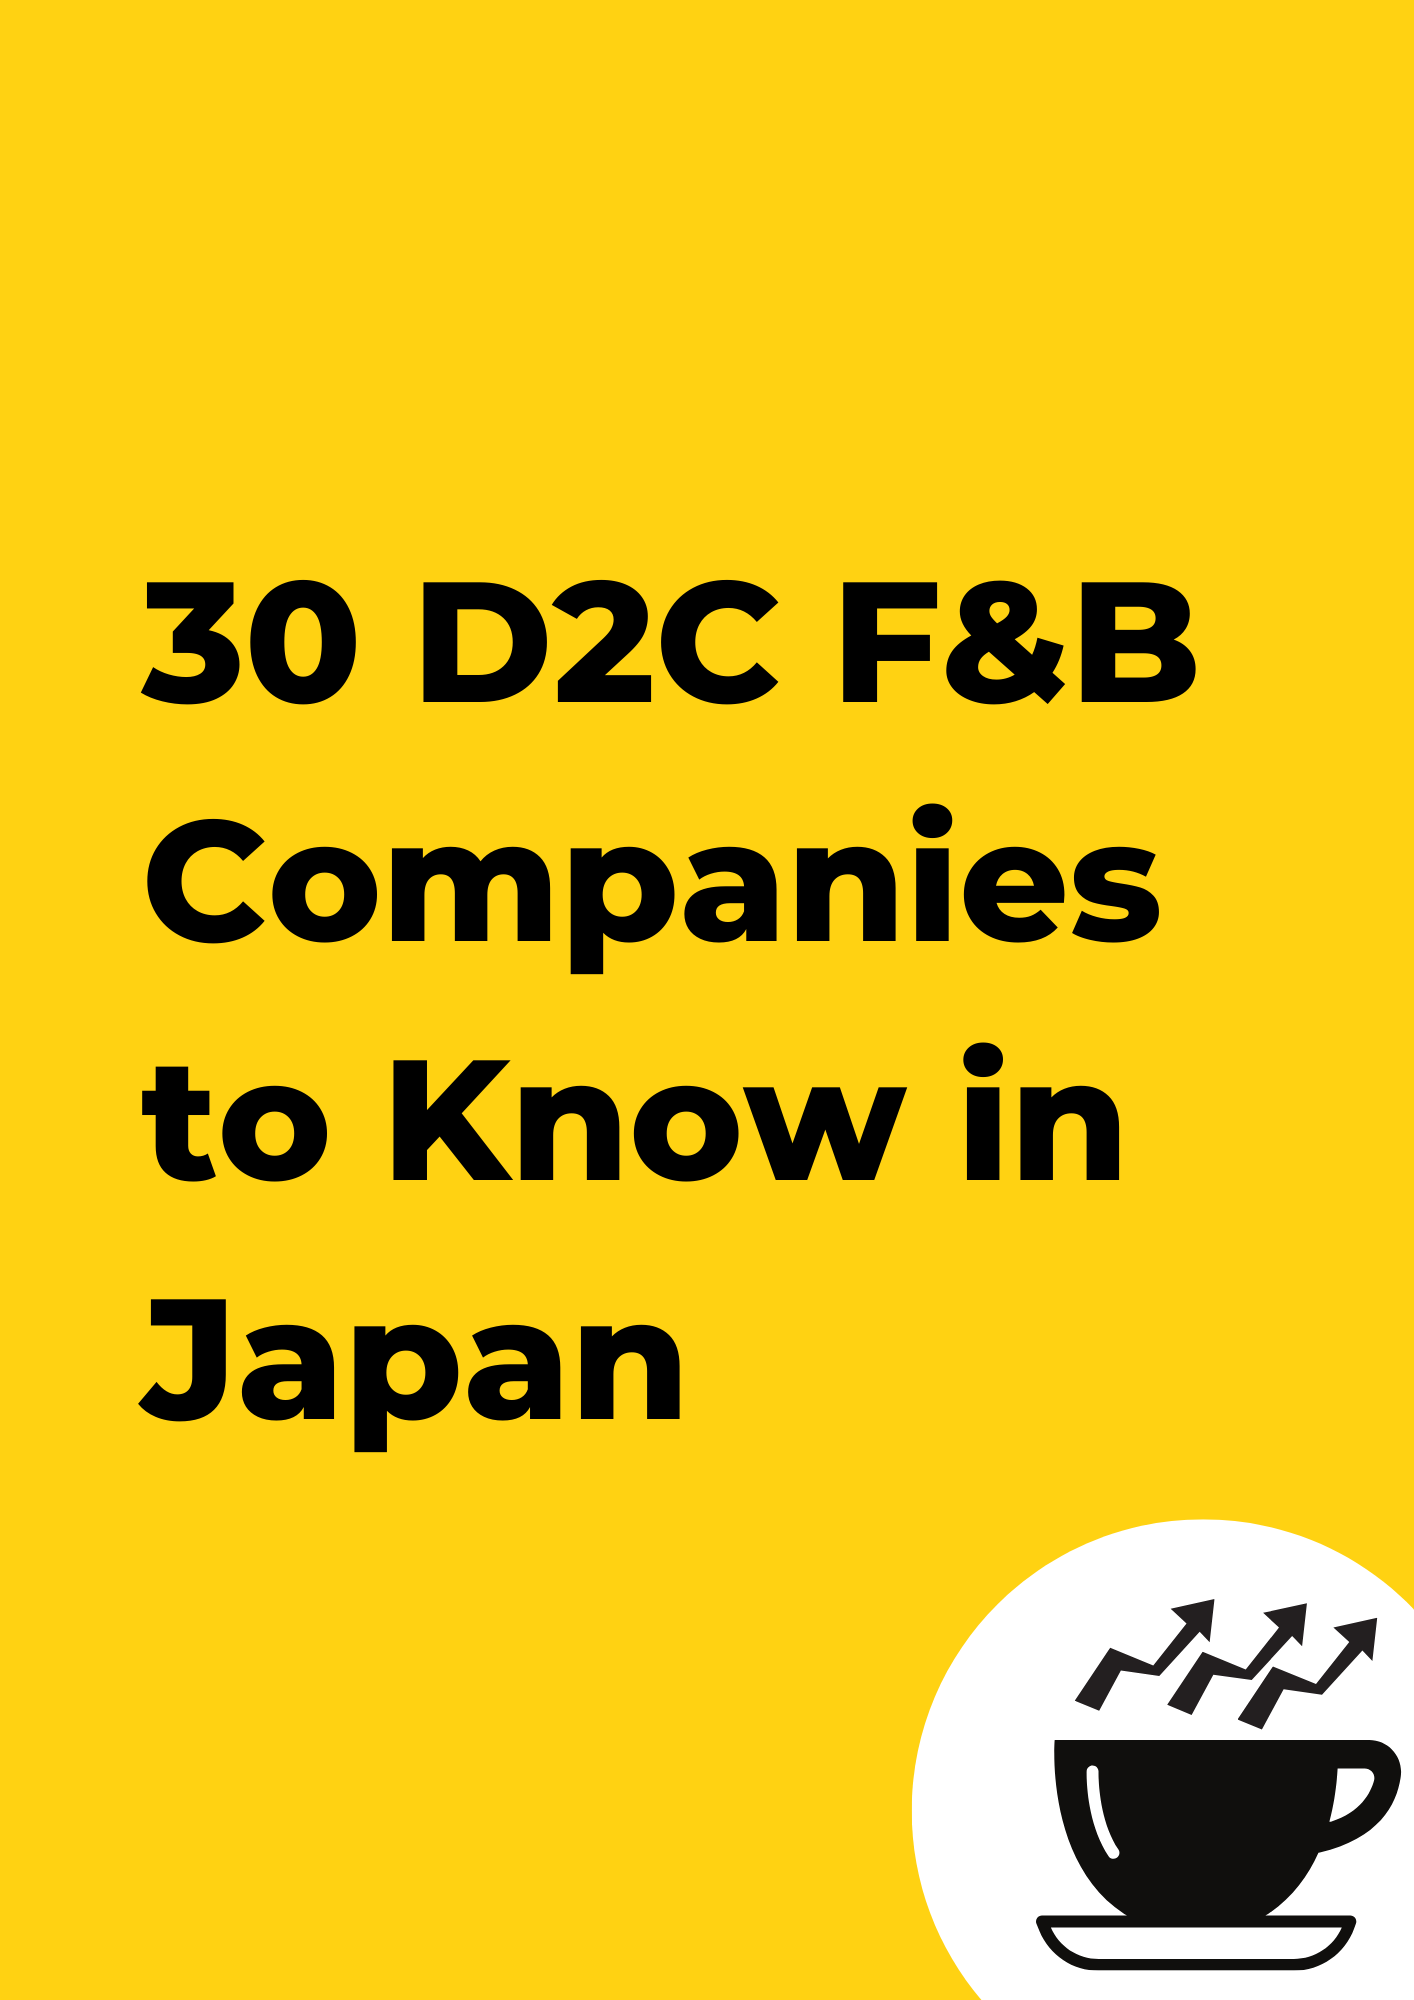 The 30 D2C F&B Companies to Know in Japan